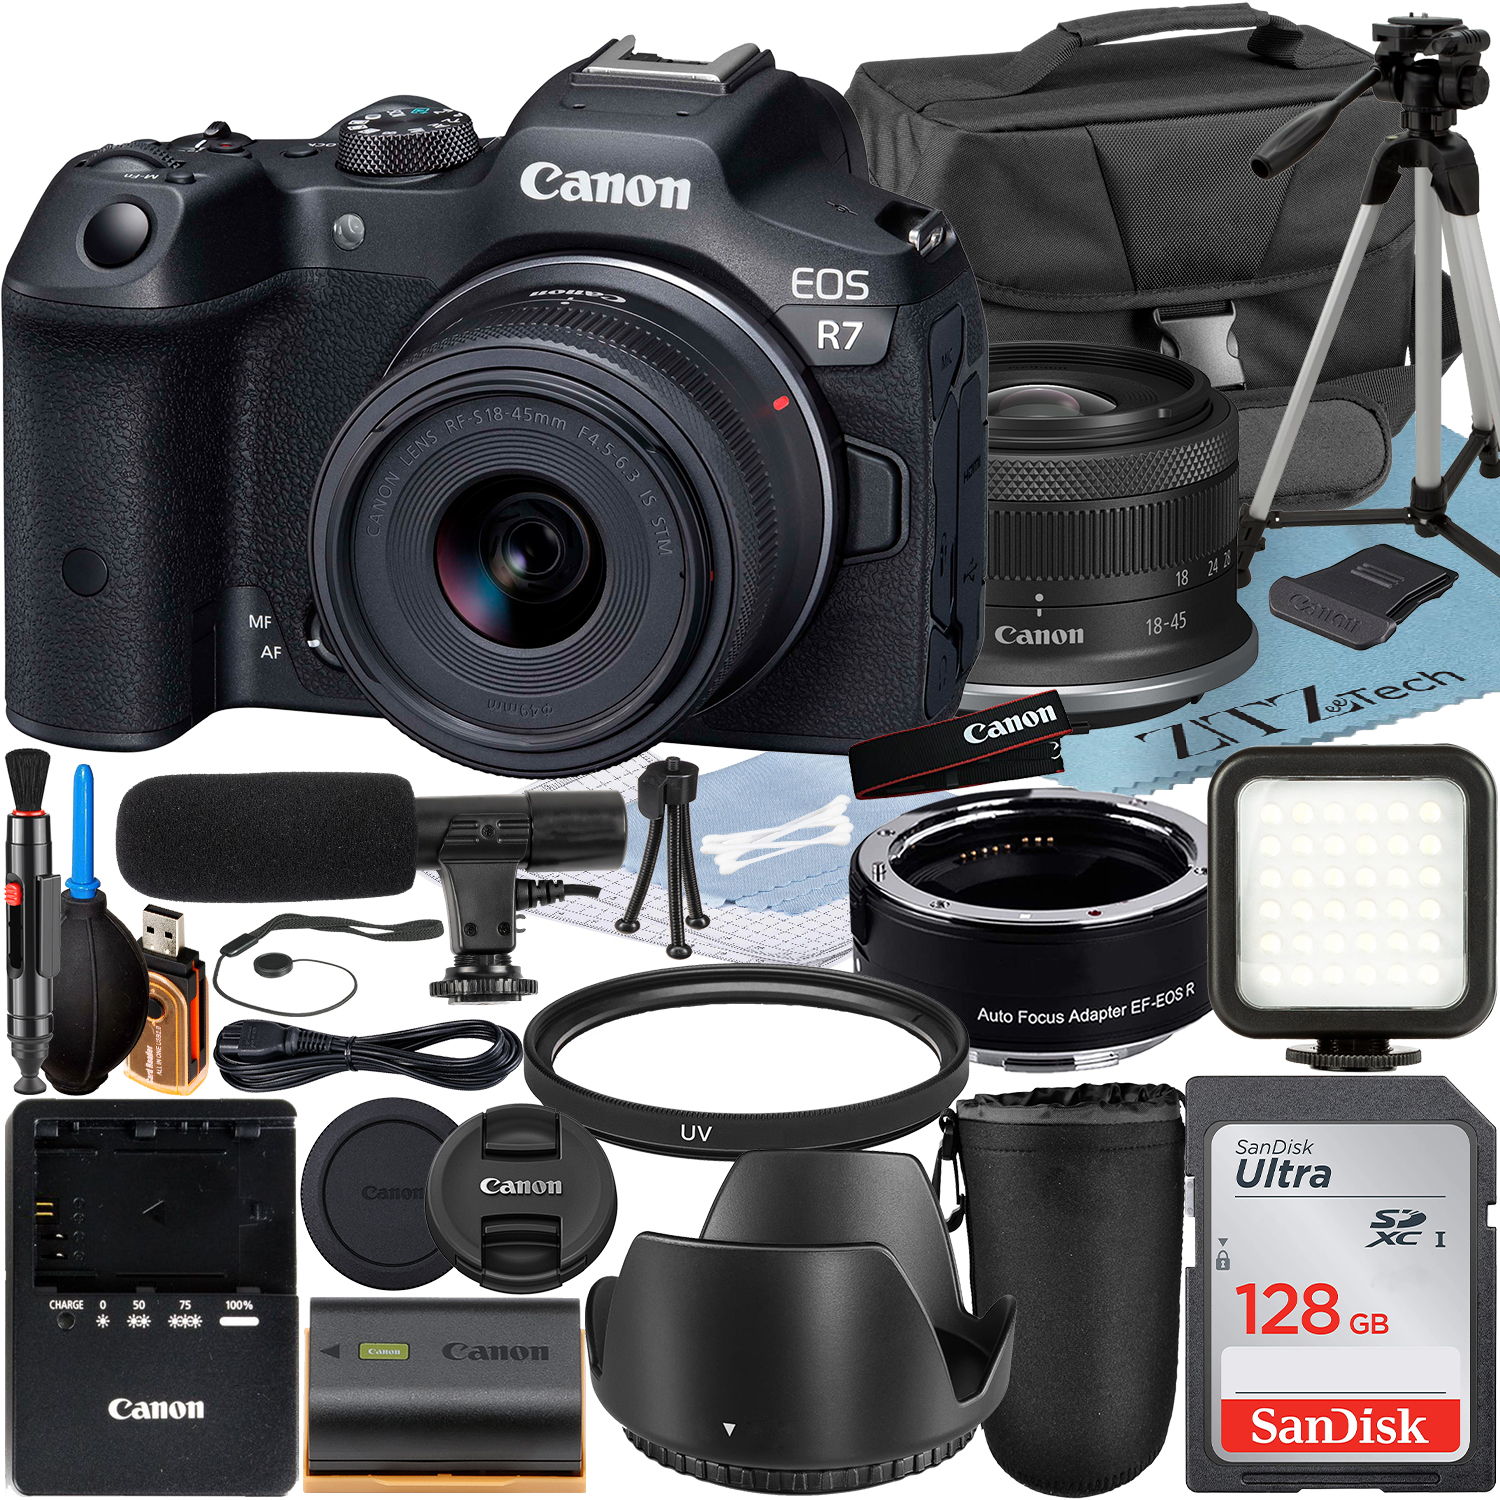 Canon EOS R7 Mirrorless Camera with RF-S 18-45mm Lens + Mount Adapter + SanDisk 128GB Memory Card + Case + LED Flash + ZeeTech Accessory Bundle